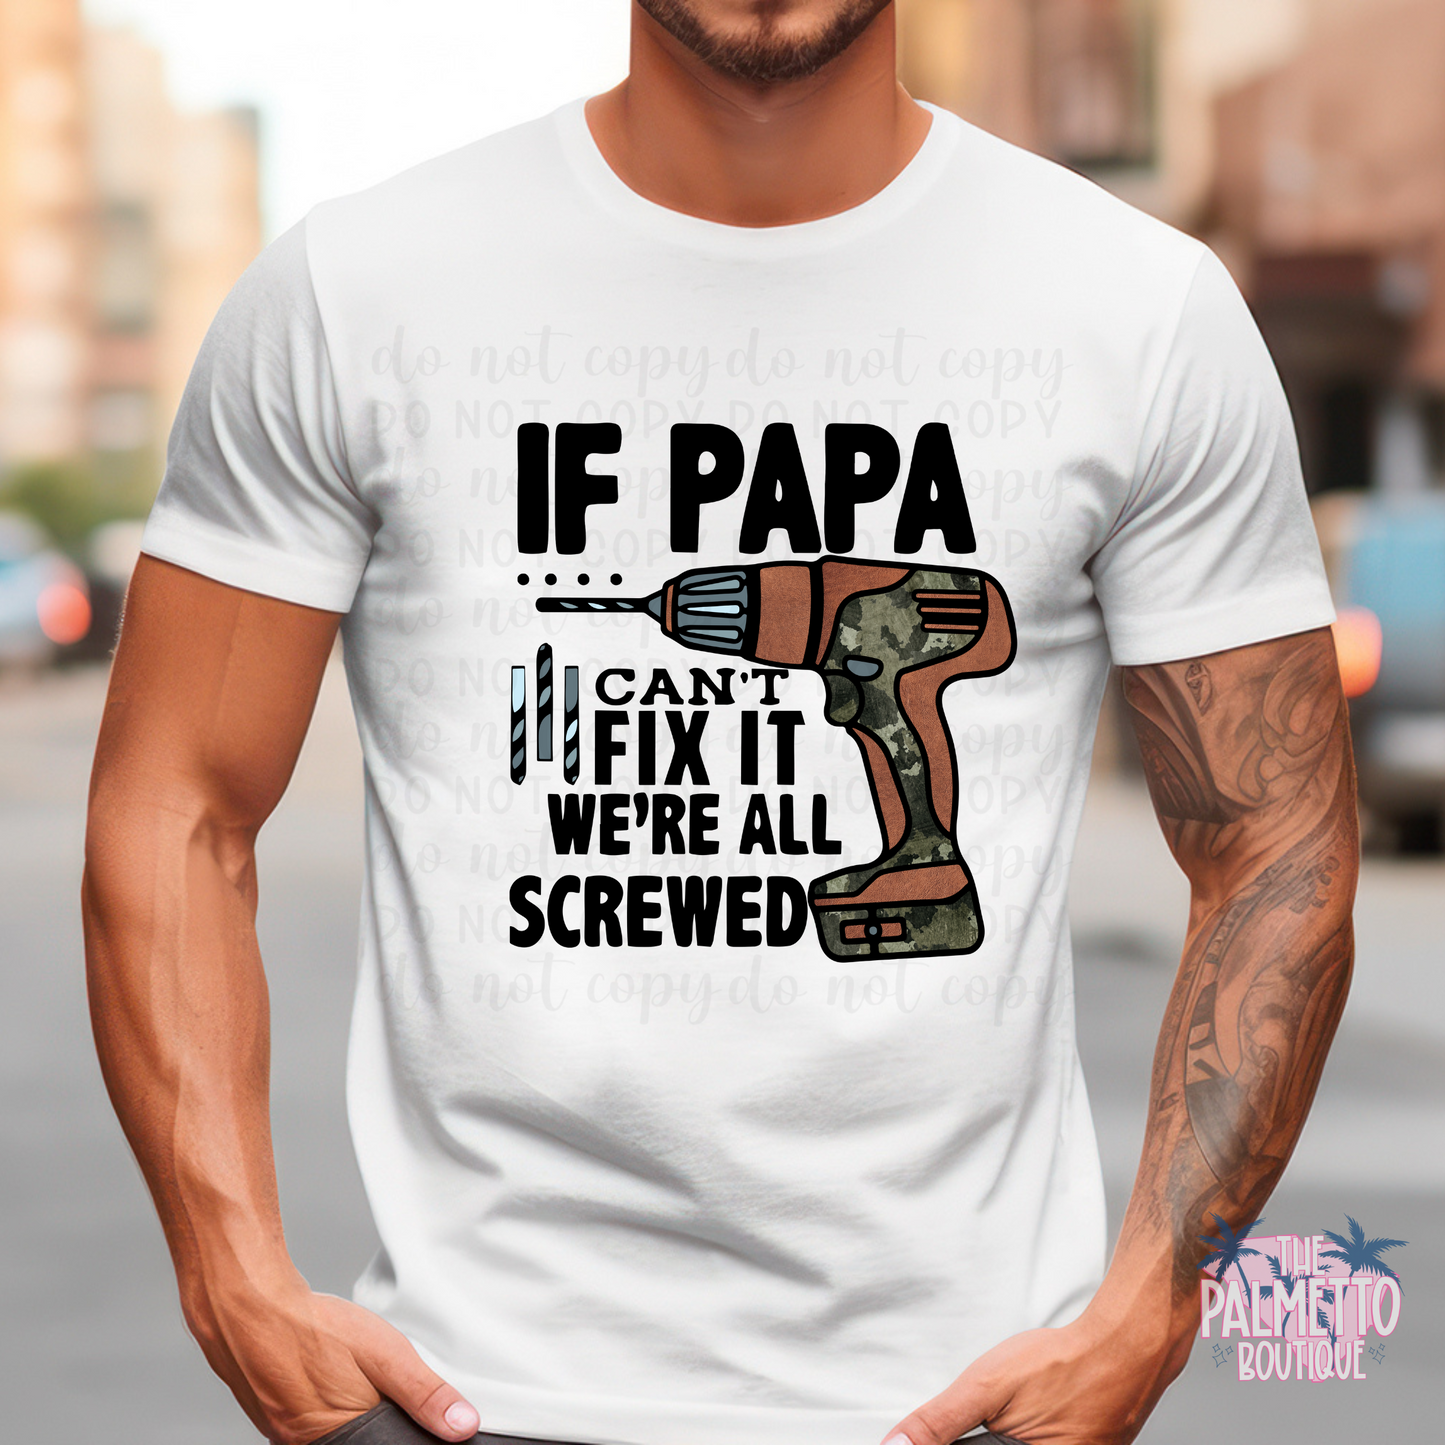 If Papa can't fix it